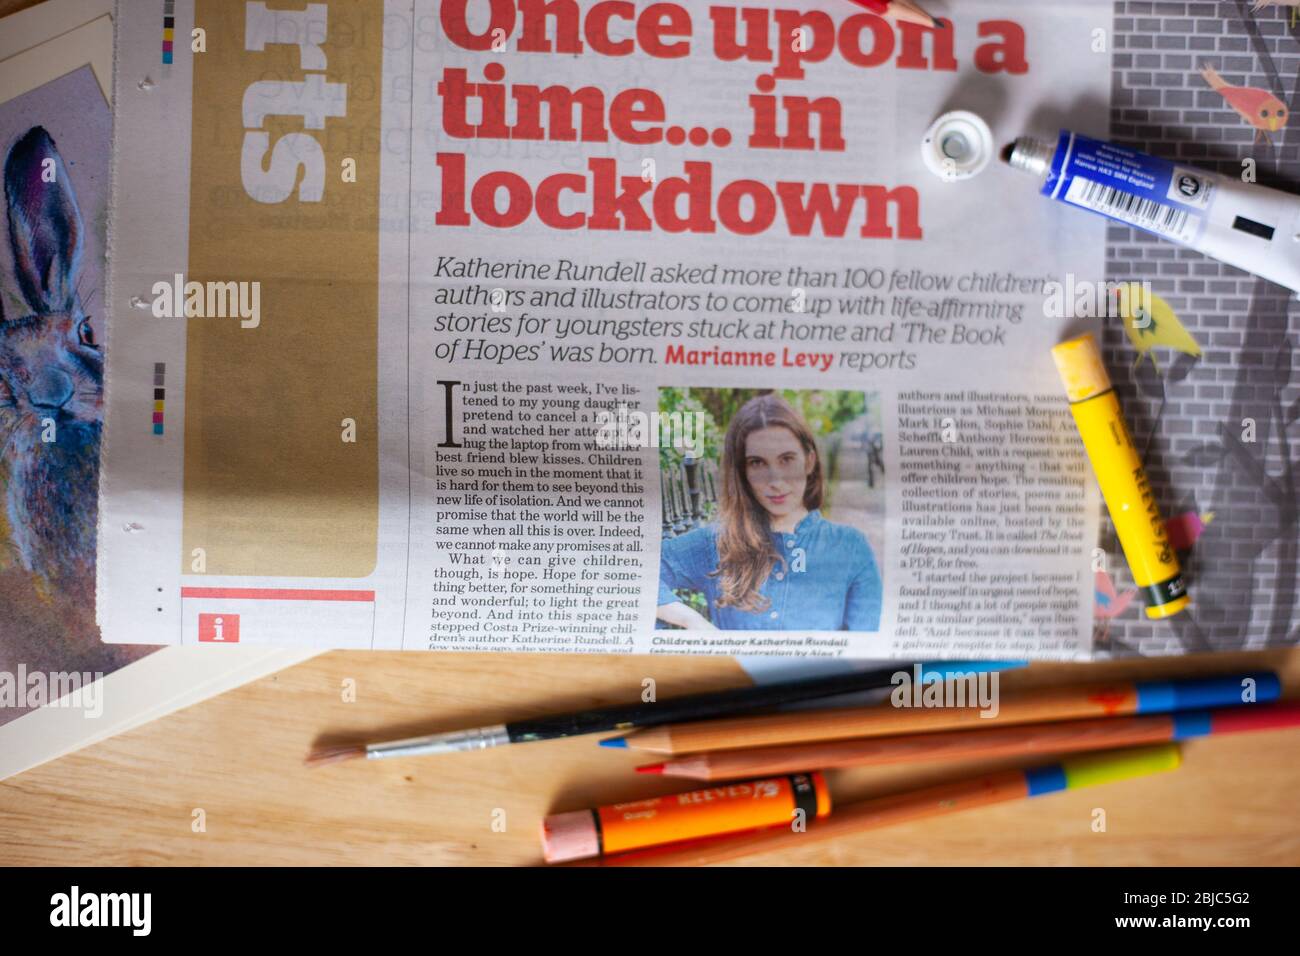 Arts & Culture News concept during Coronavirus lockdown. UK, April 2020. Arts in the News with art materials & newspaper on desk. Stock Photo